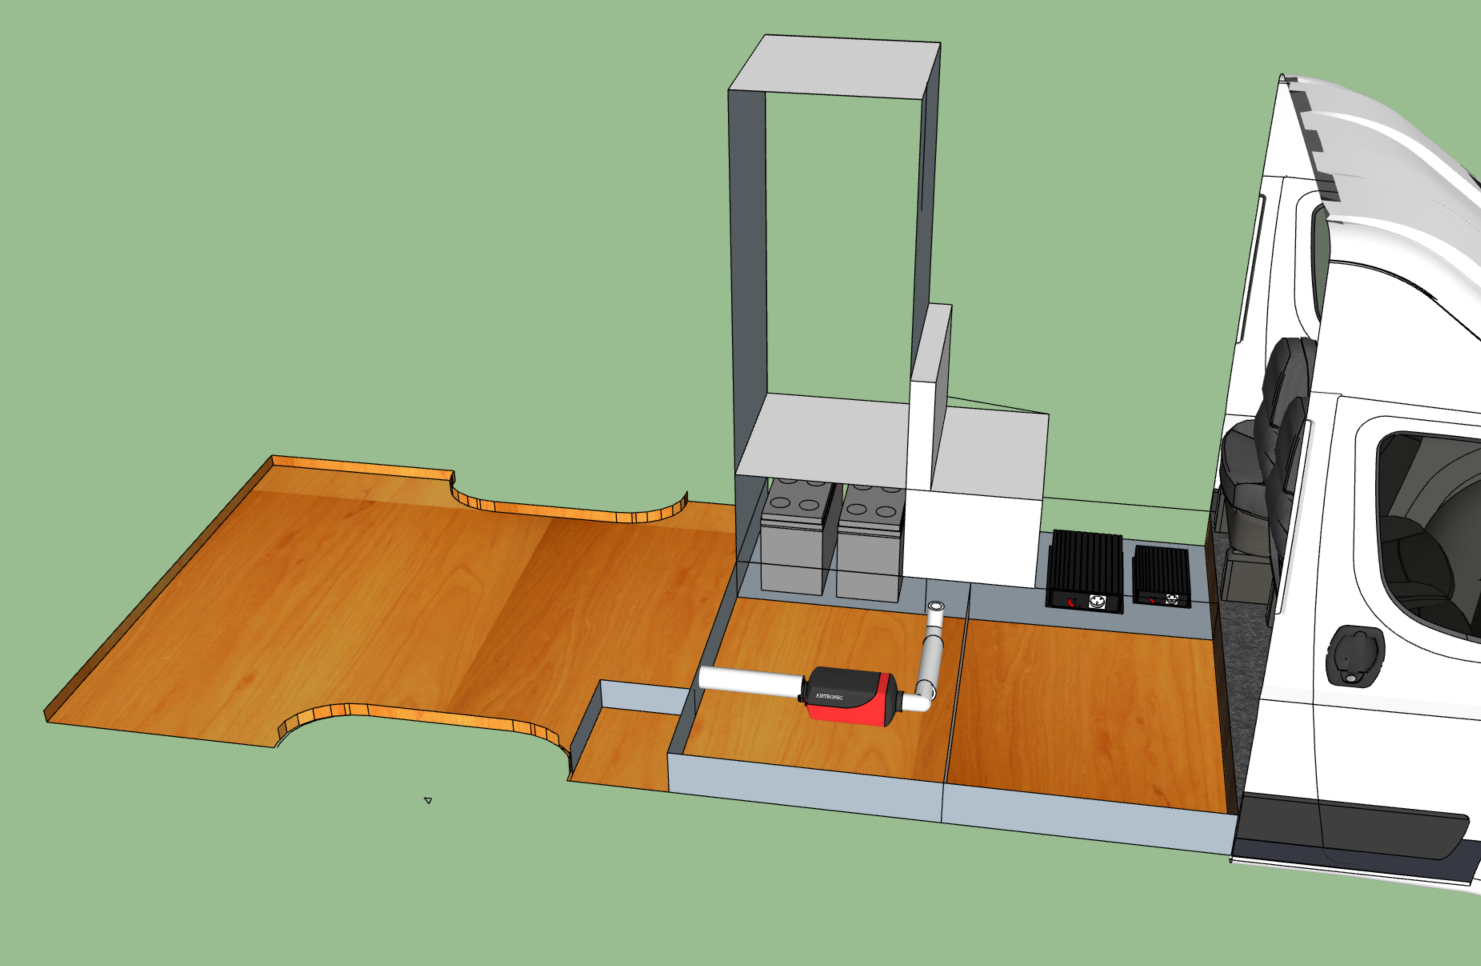 2021-09-09 18_39_58-AutoSave_AutoSave_AutoSave_L4H2++41 - SketchUp Pro 2021 (29 Tage in TESTVERSION .png